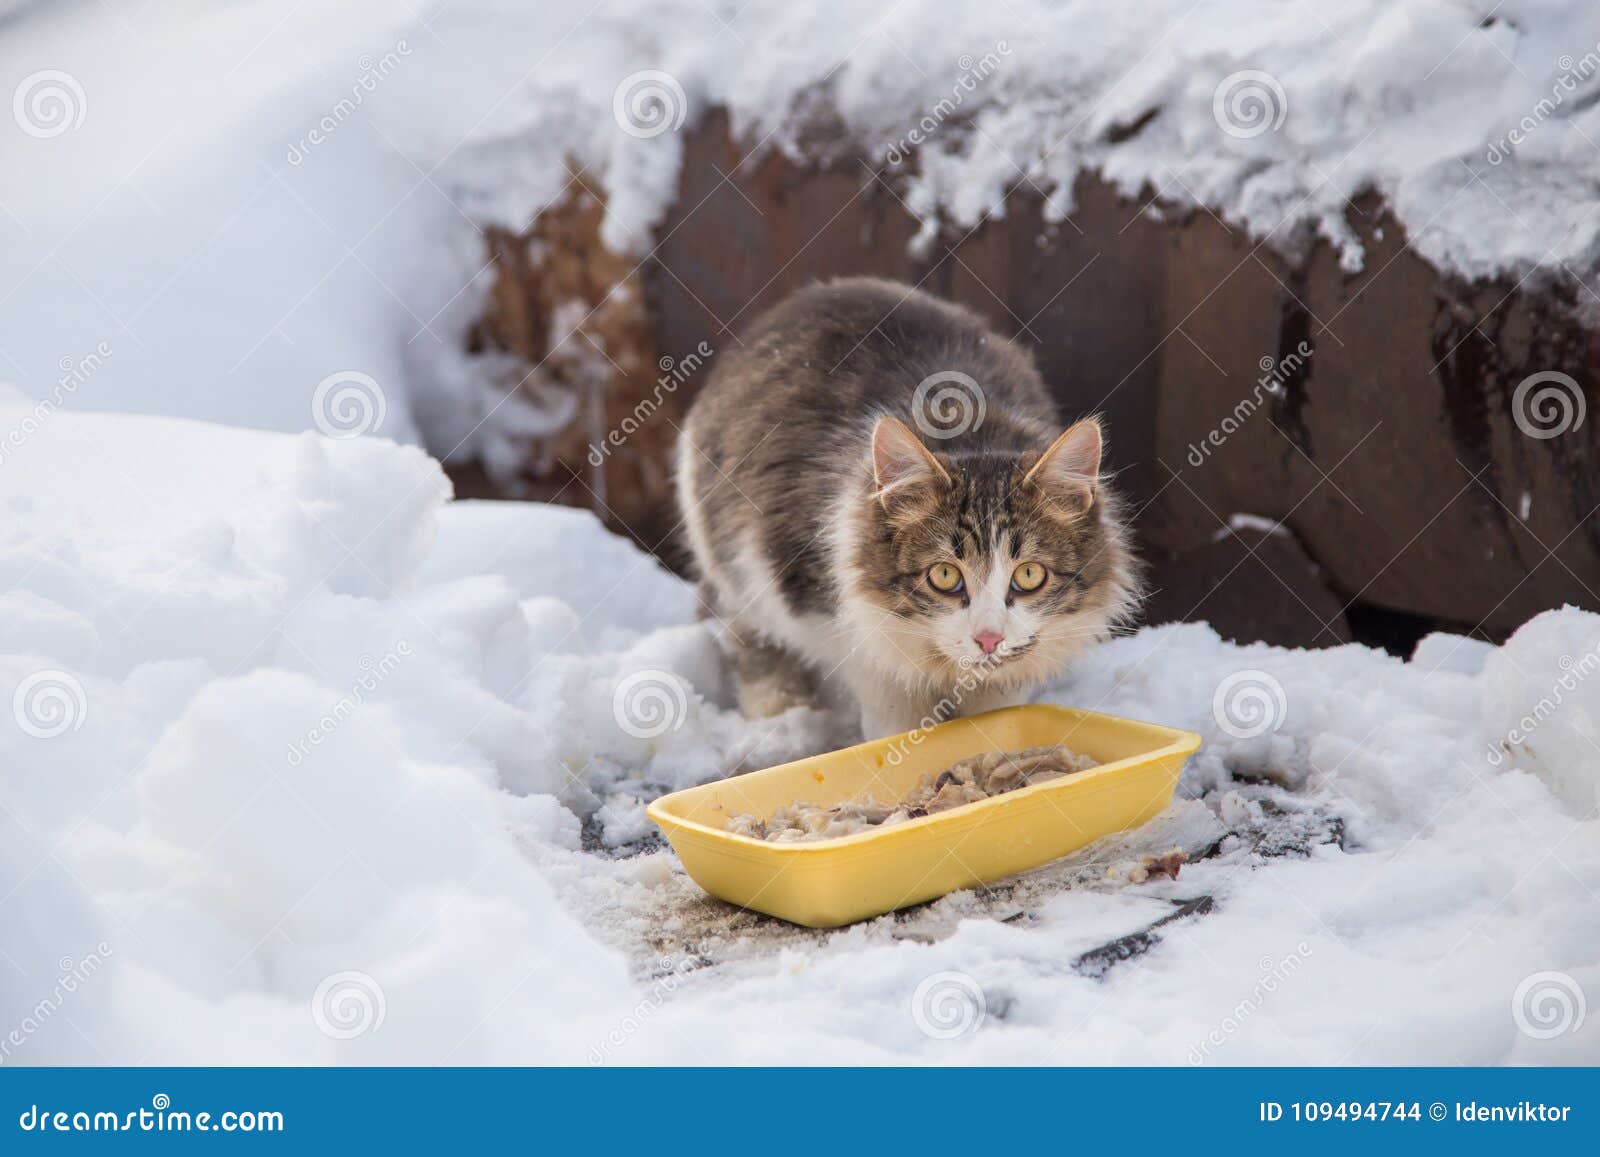 Homeless Cat In Winter Outdoors Eat Food Stock Photo Image of baby